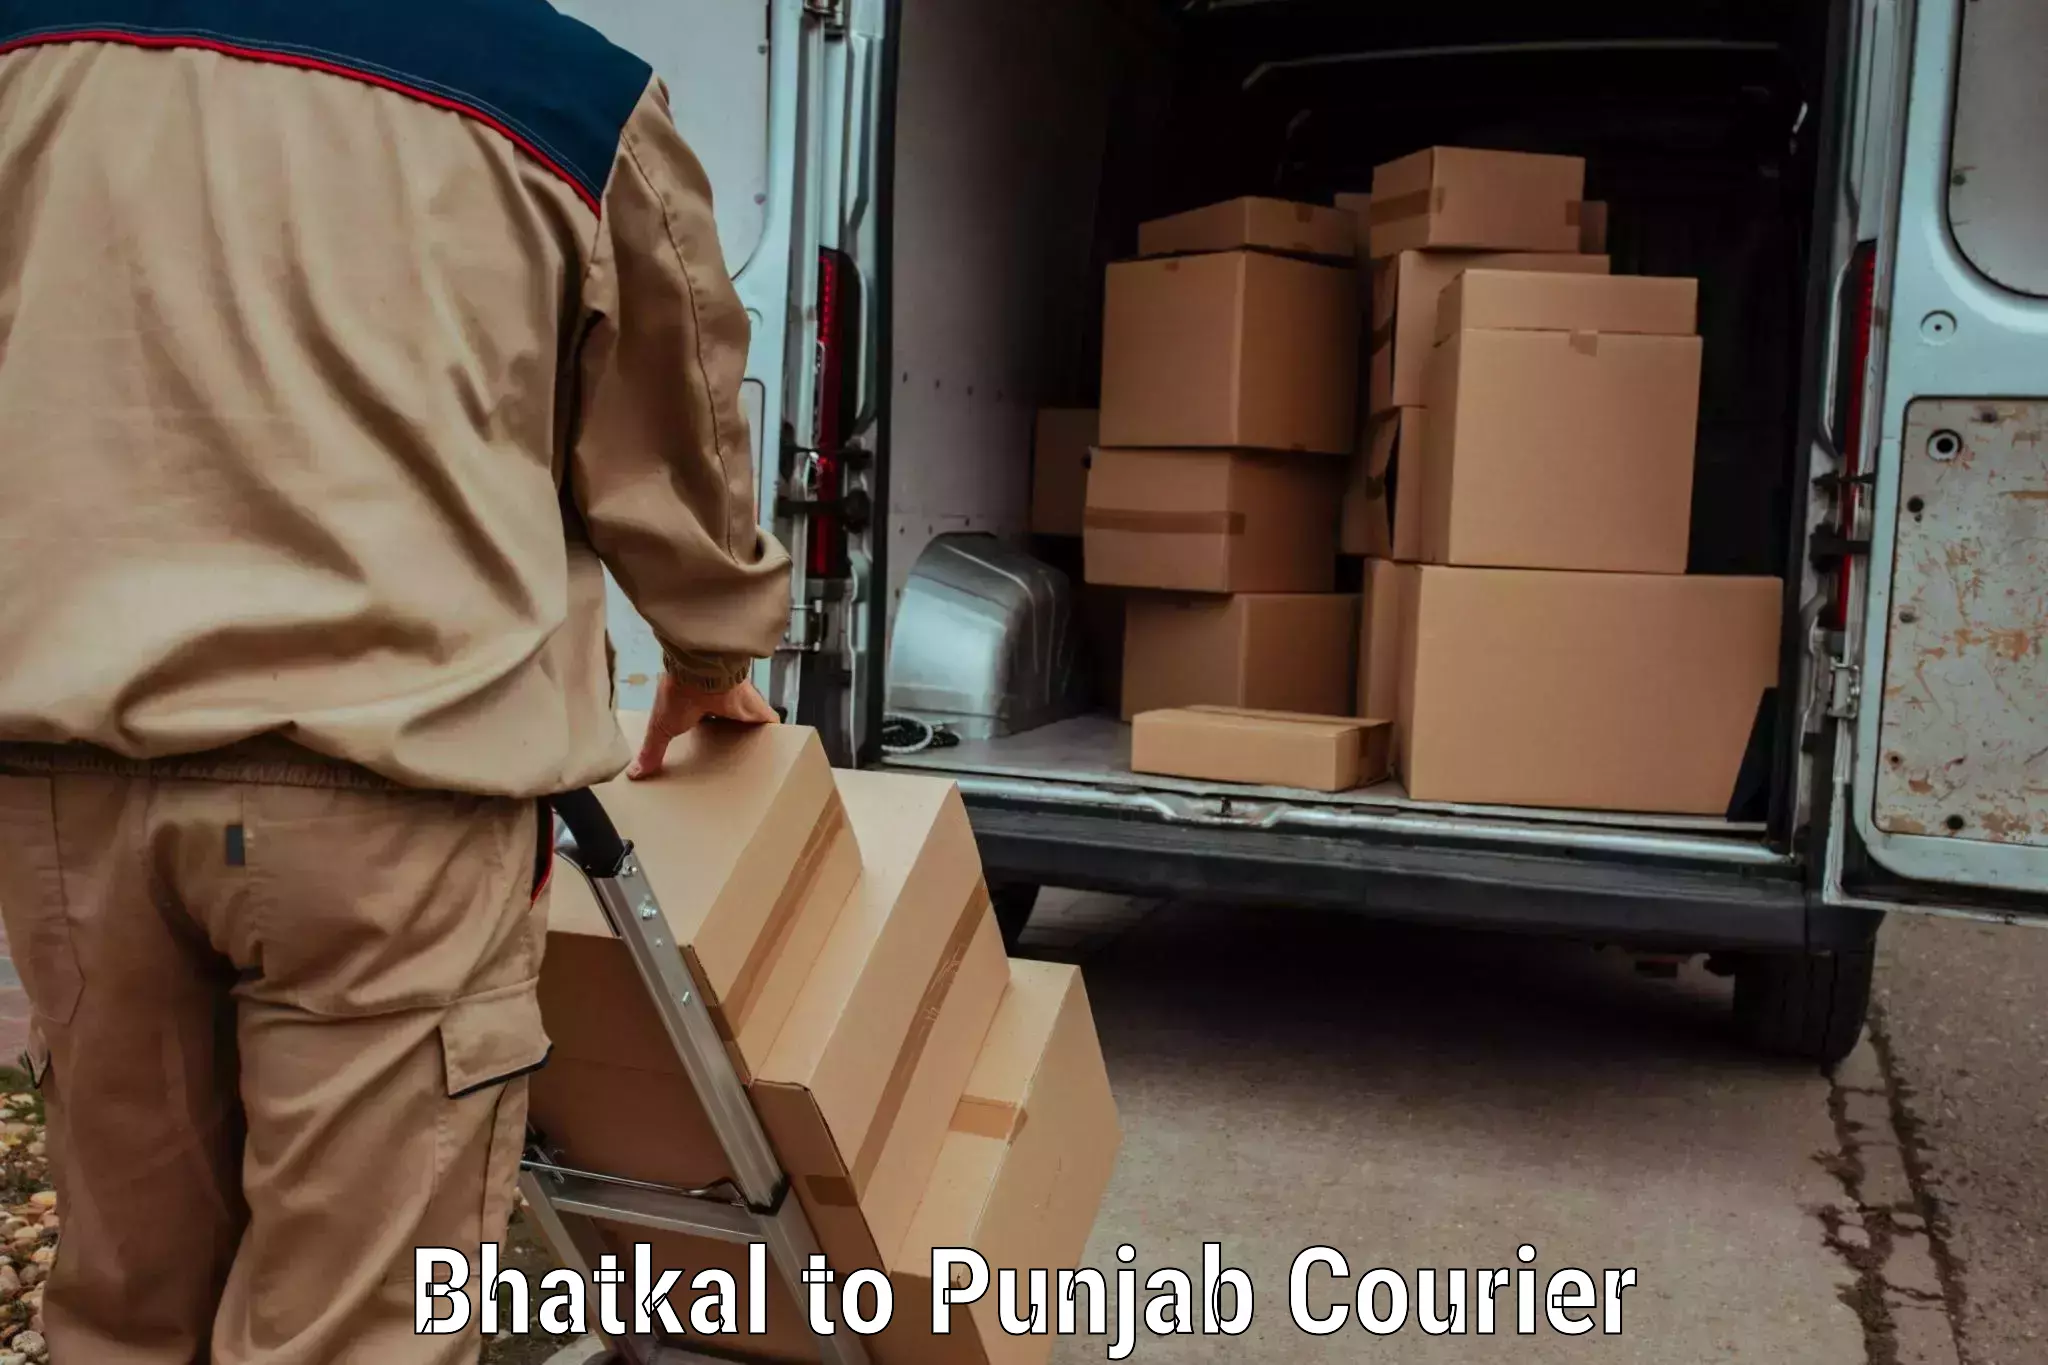 Global shipping solutions Bhatkal to Mehta Chowk